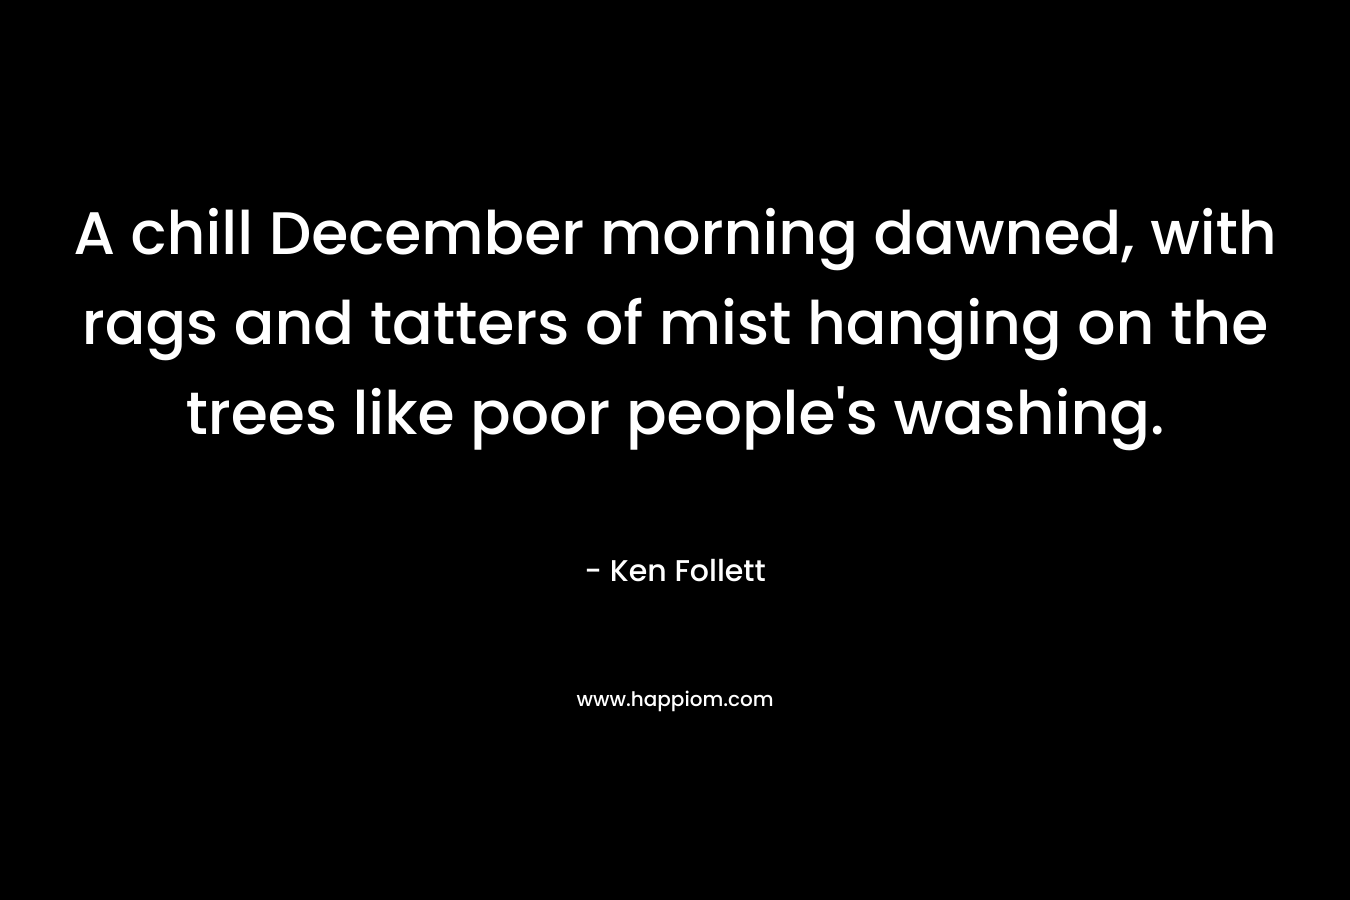 A chill December morning dawned, with rags and tatters of mist hanging on the trees like poor people's washing.